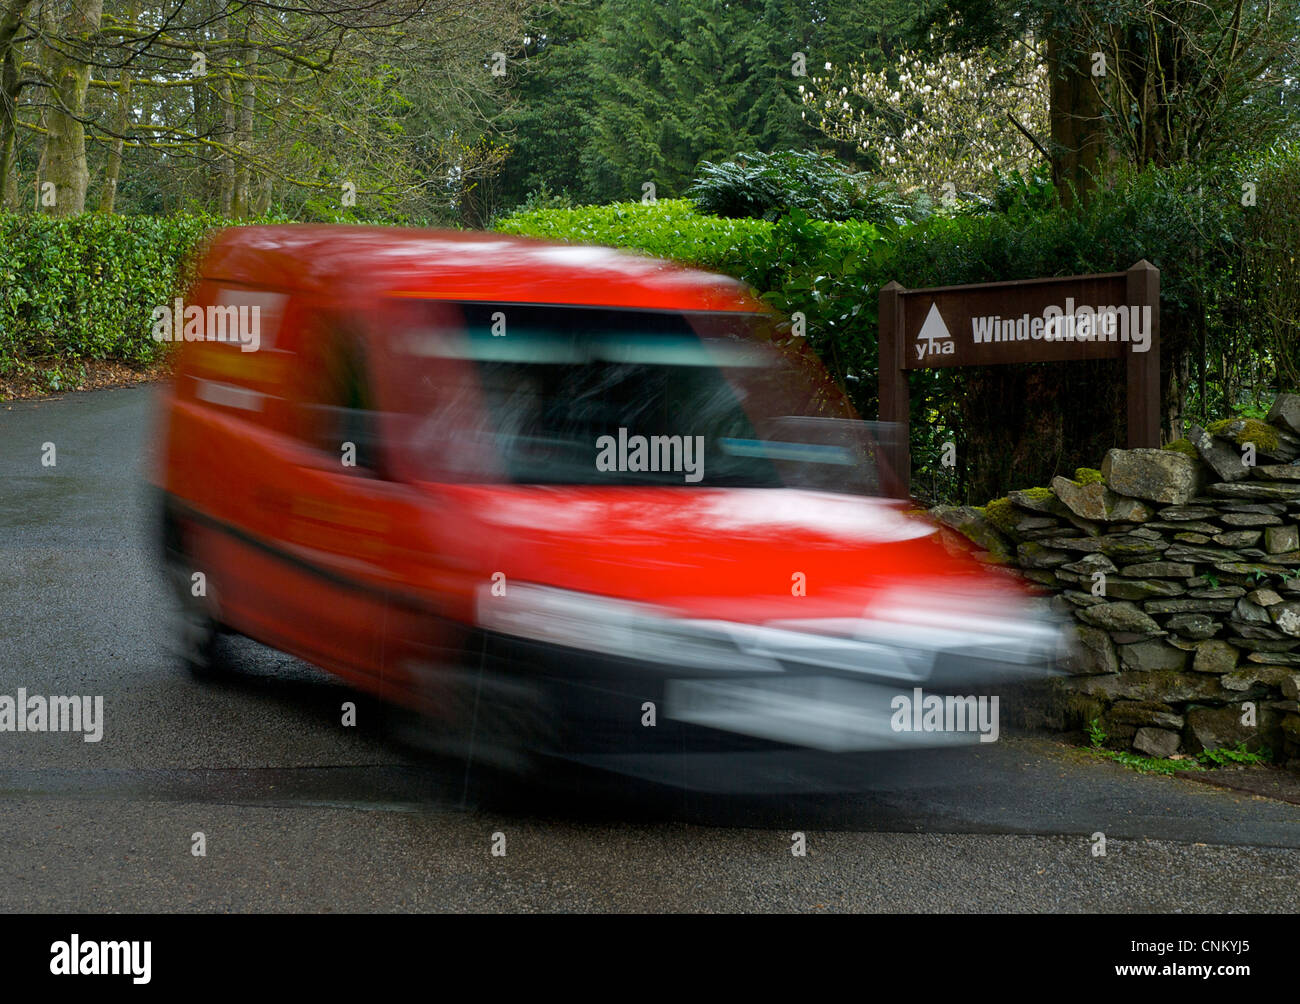 Blurred Royal Mail van delivering to Windermere Youth Hostel, Troutbeck, Lake District National Park, Cumbria, England UK Stock Photo